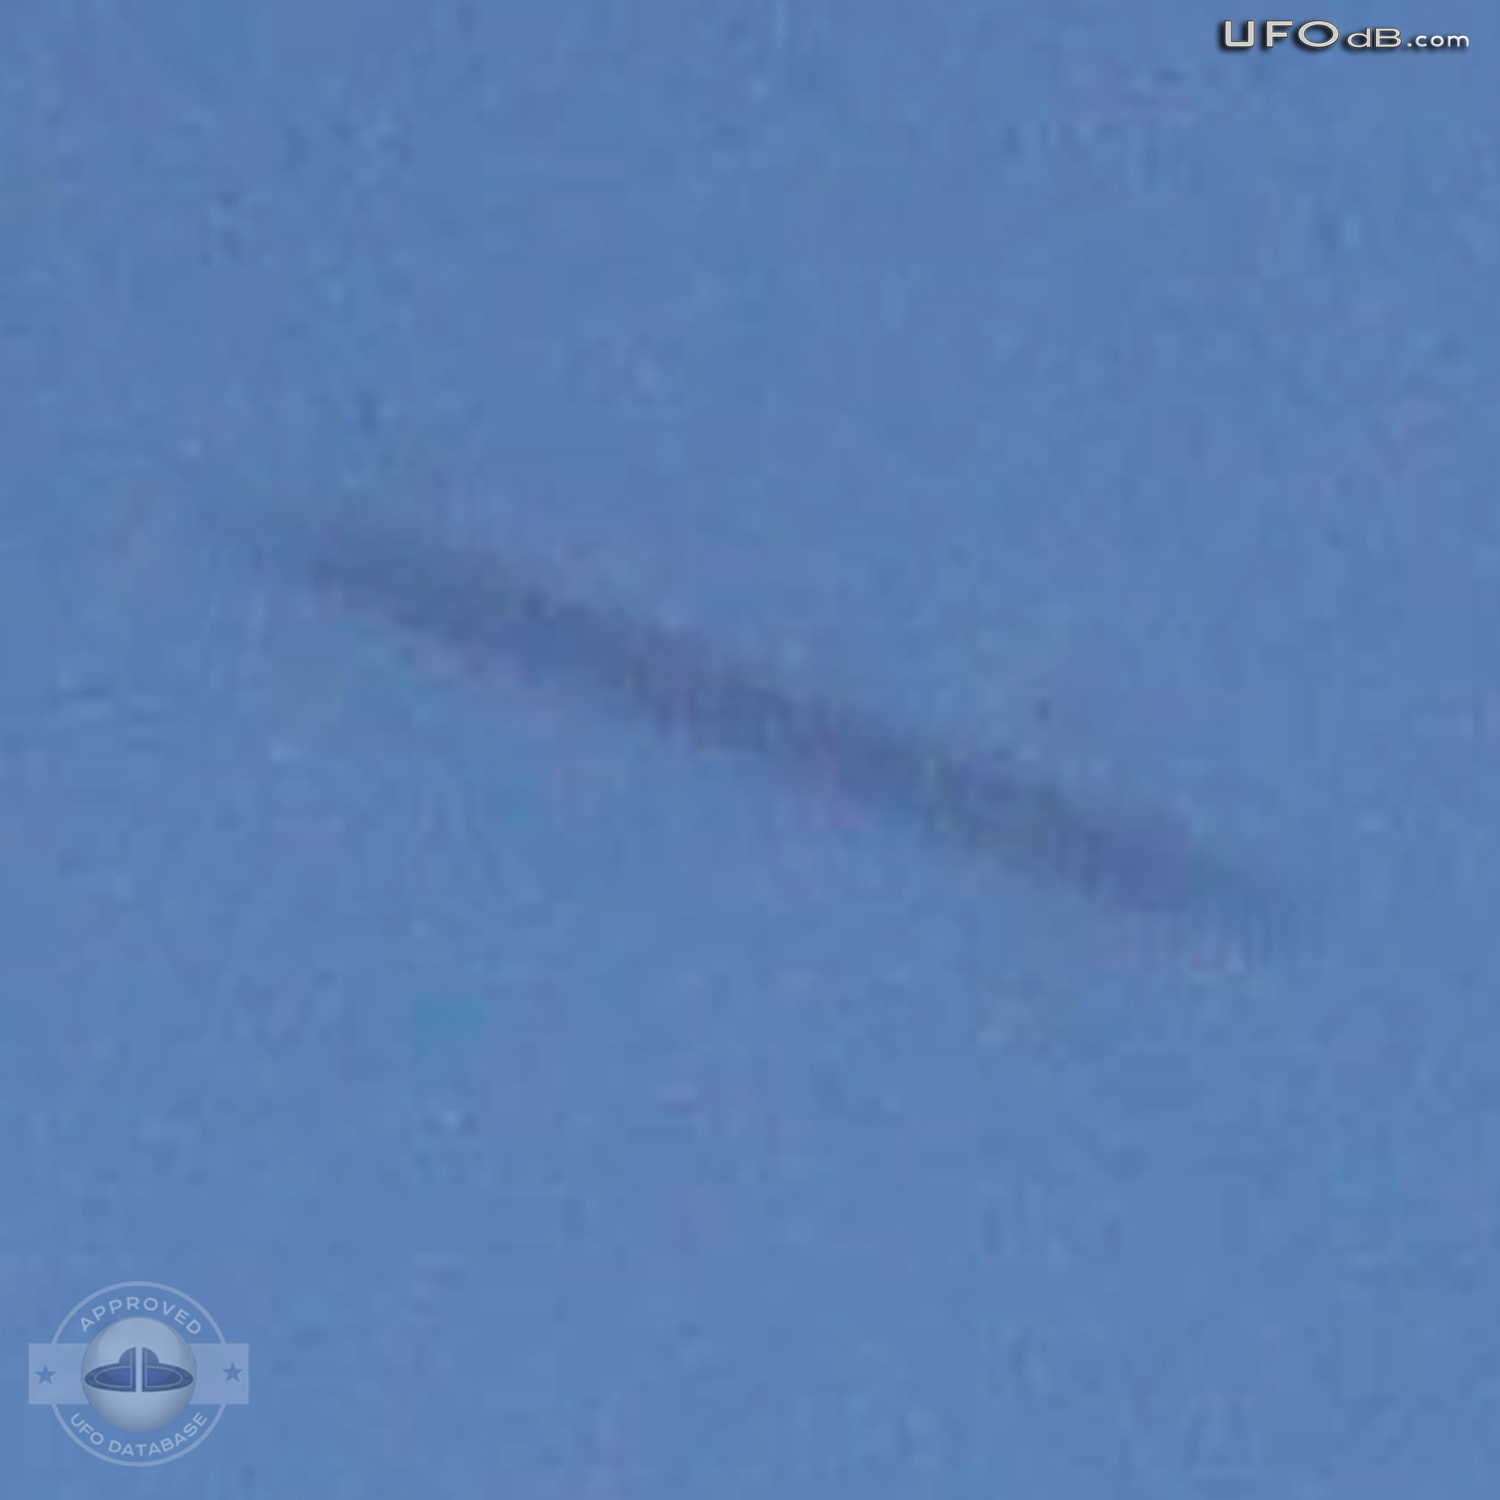 Guarulhos Airport, Brazil | UFO near airplane taking off | April 2011 UFO Picture #337-5